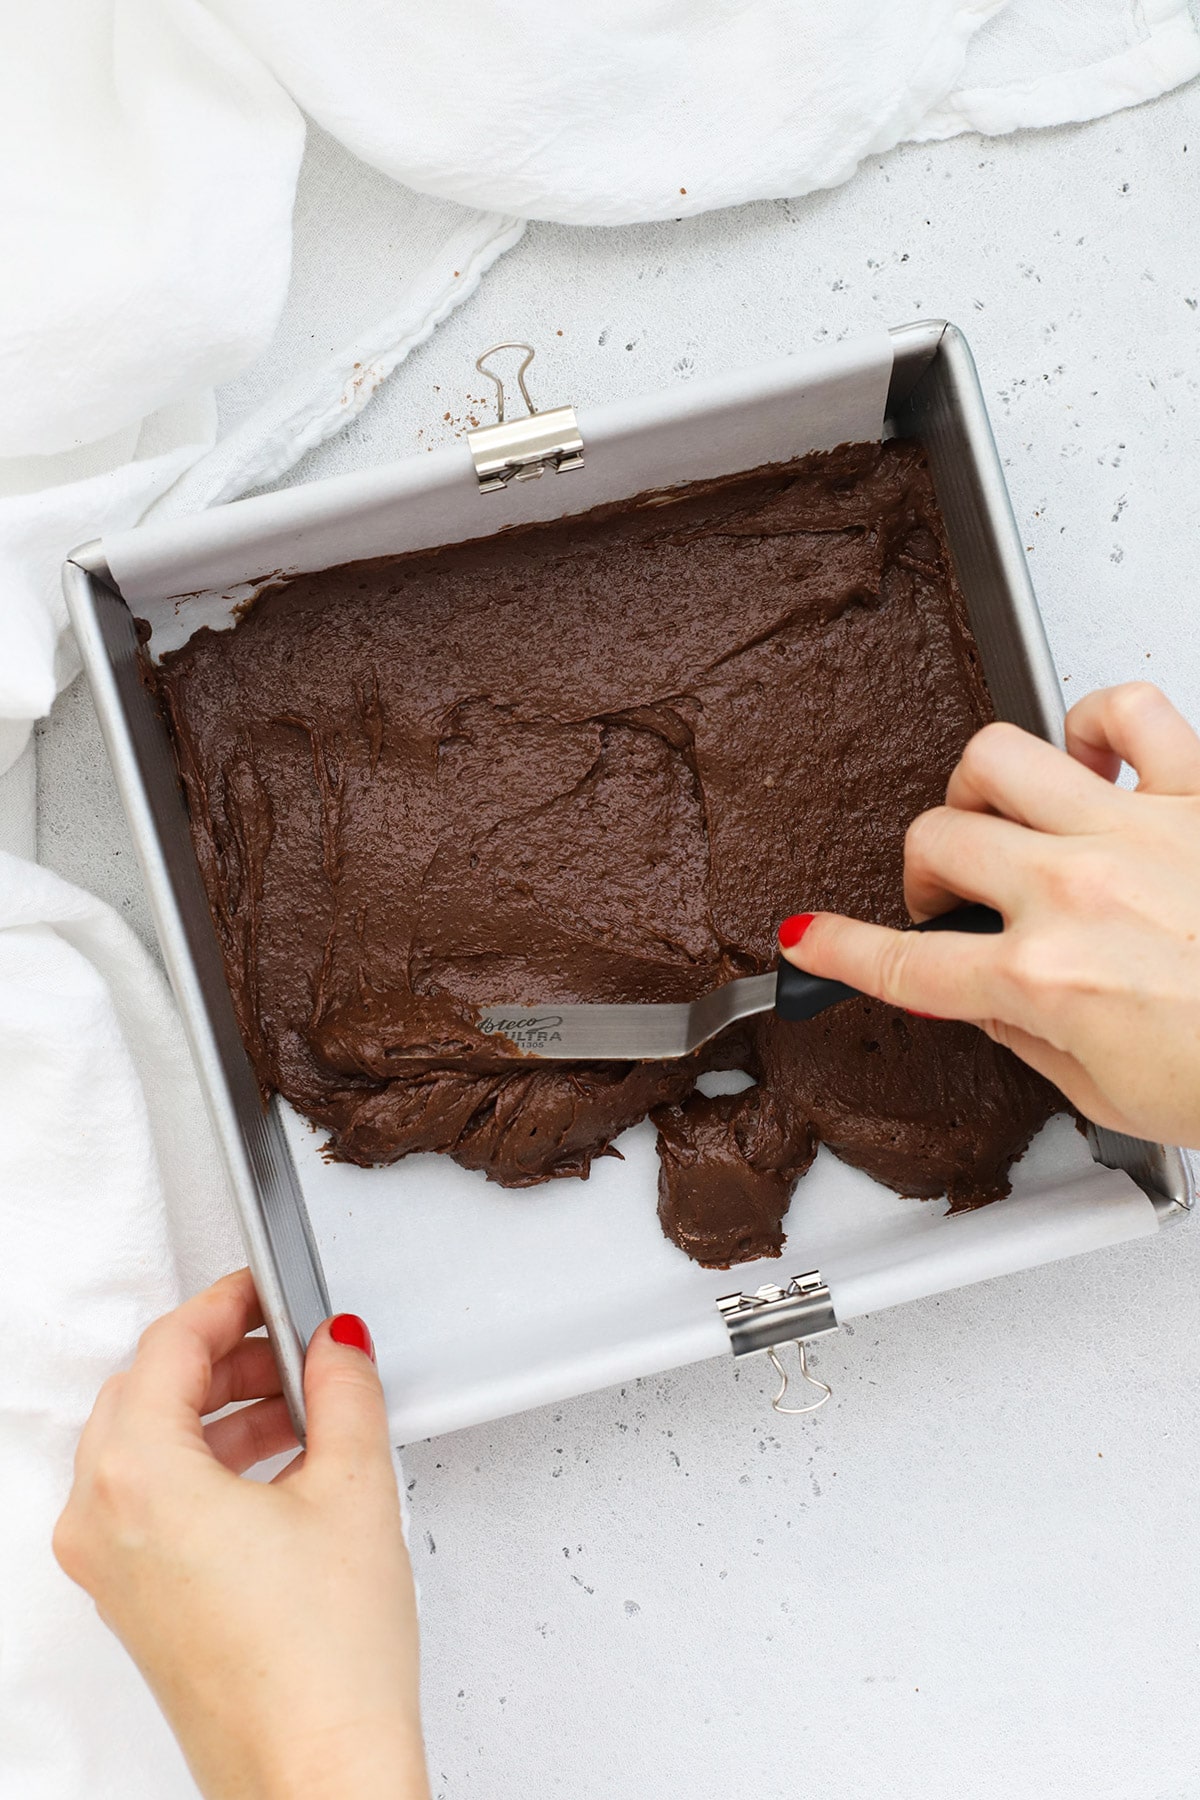 Spreading brownie batter into an 8x8 metal pan to make gluten-free ice cream sandwiches